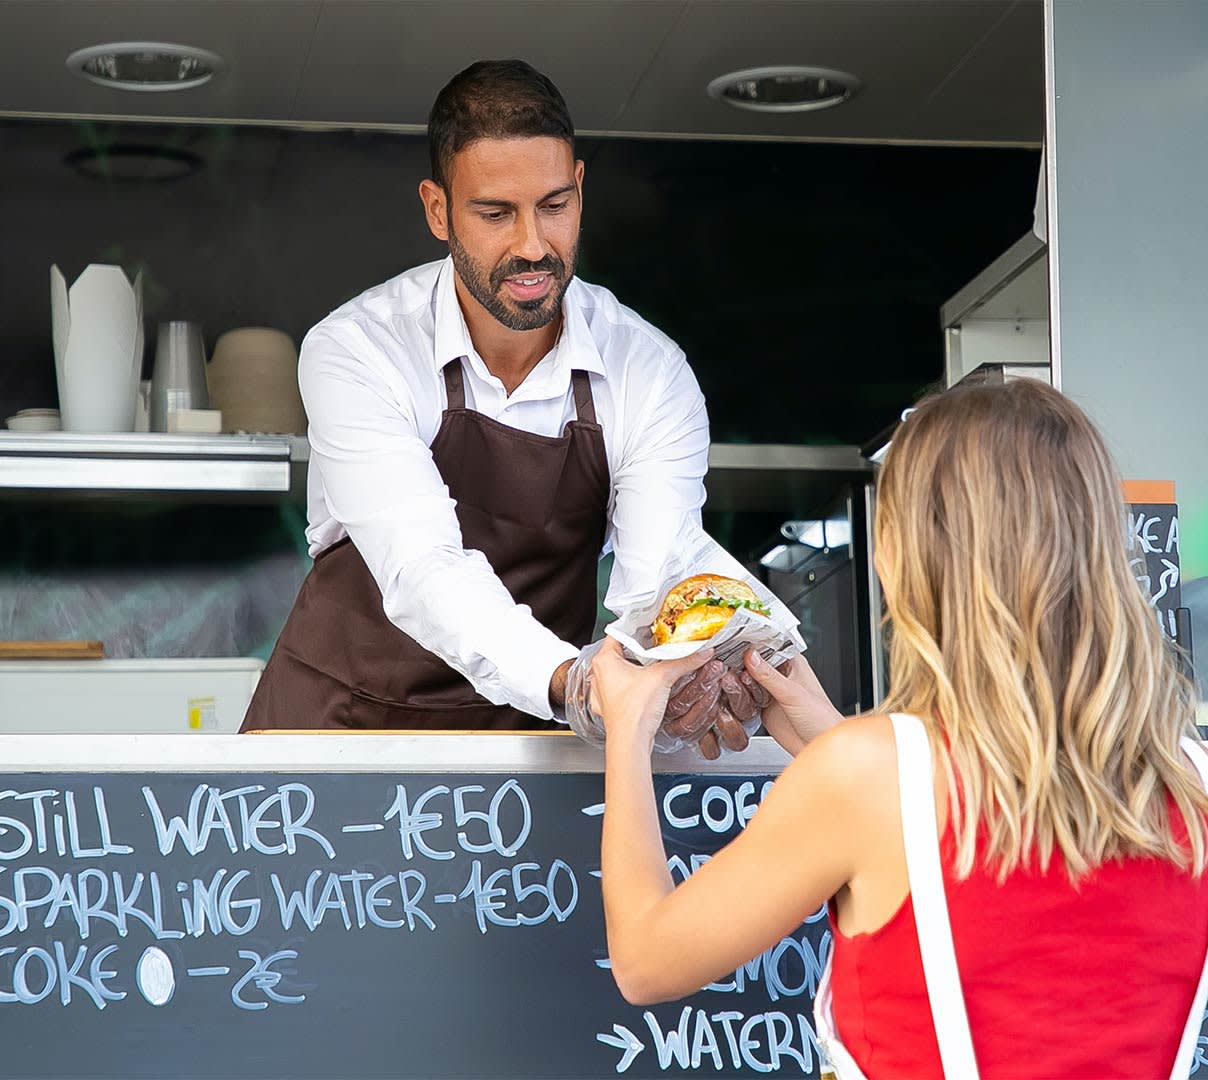 Mx Blog (US/CA/AU/NZ) - How To Create an Effective Food Truck Business Plan - Handing food to customer from food truck